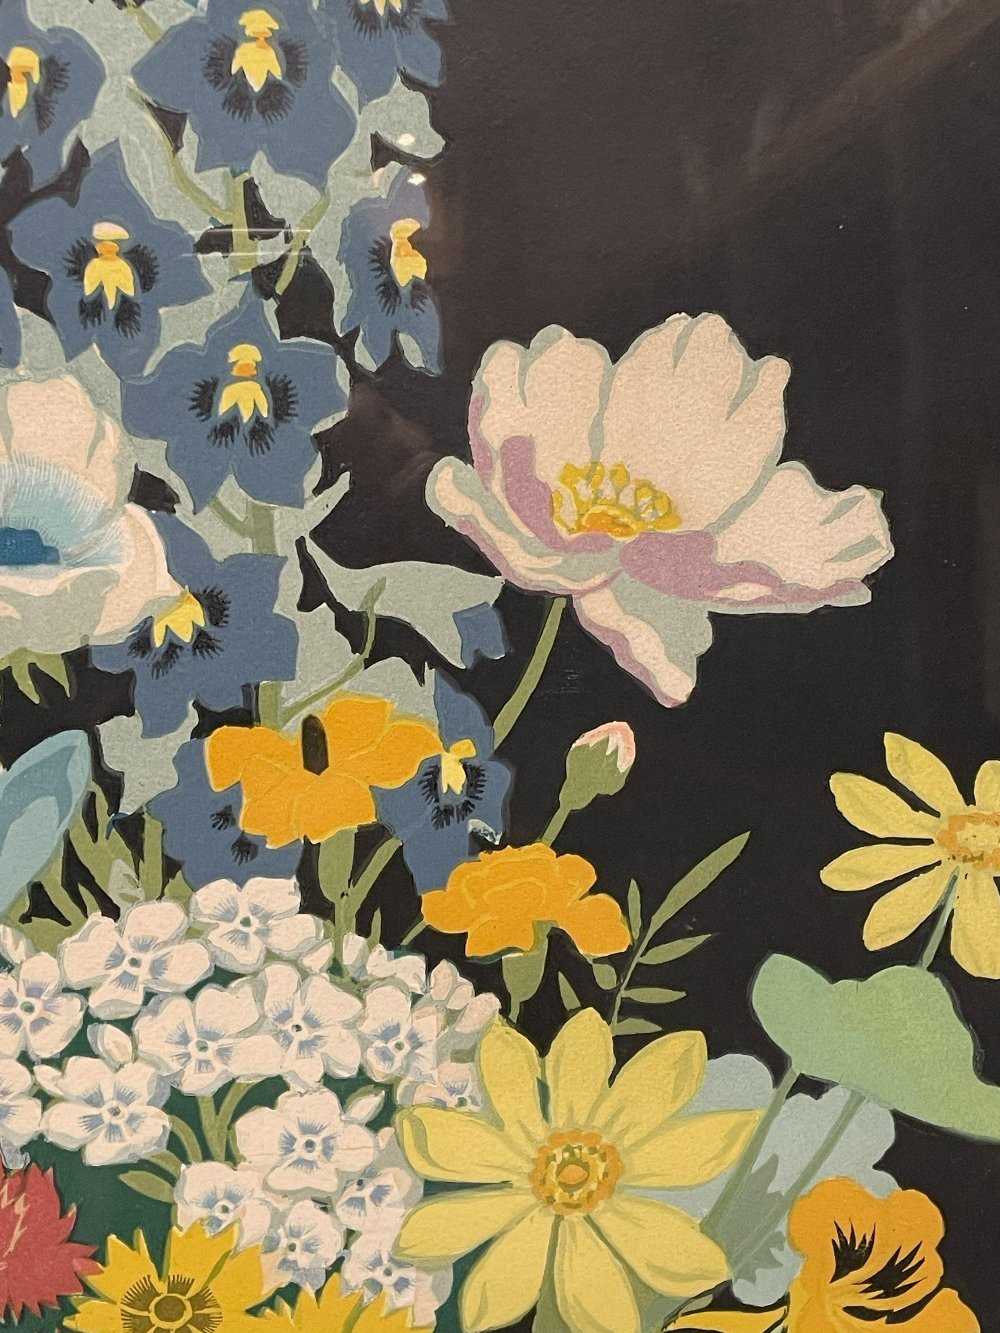 JOHN HALL THORPE (1874-1947) woodcut - The Country Bunch, wildflowers in a blue vase with window - Image 4 of 17